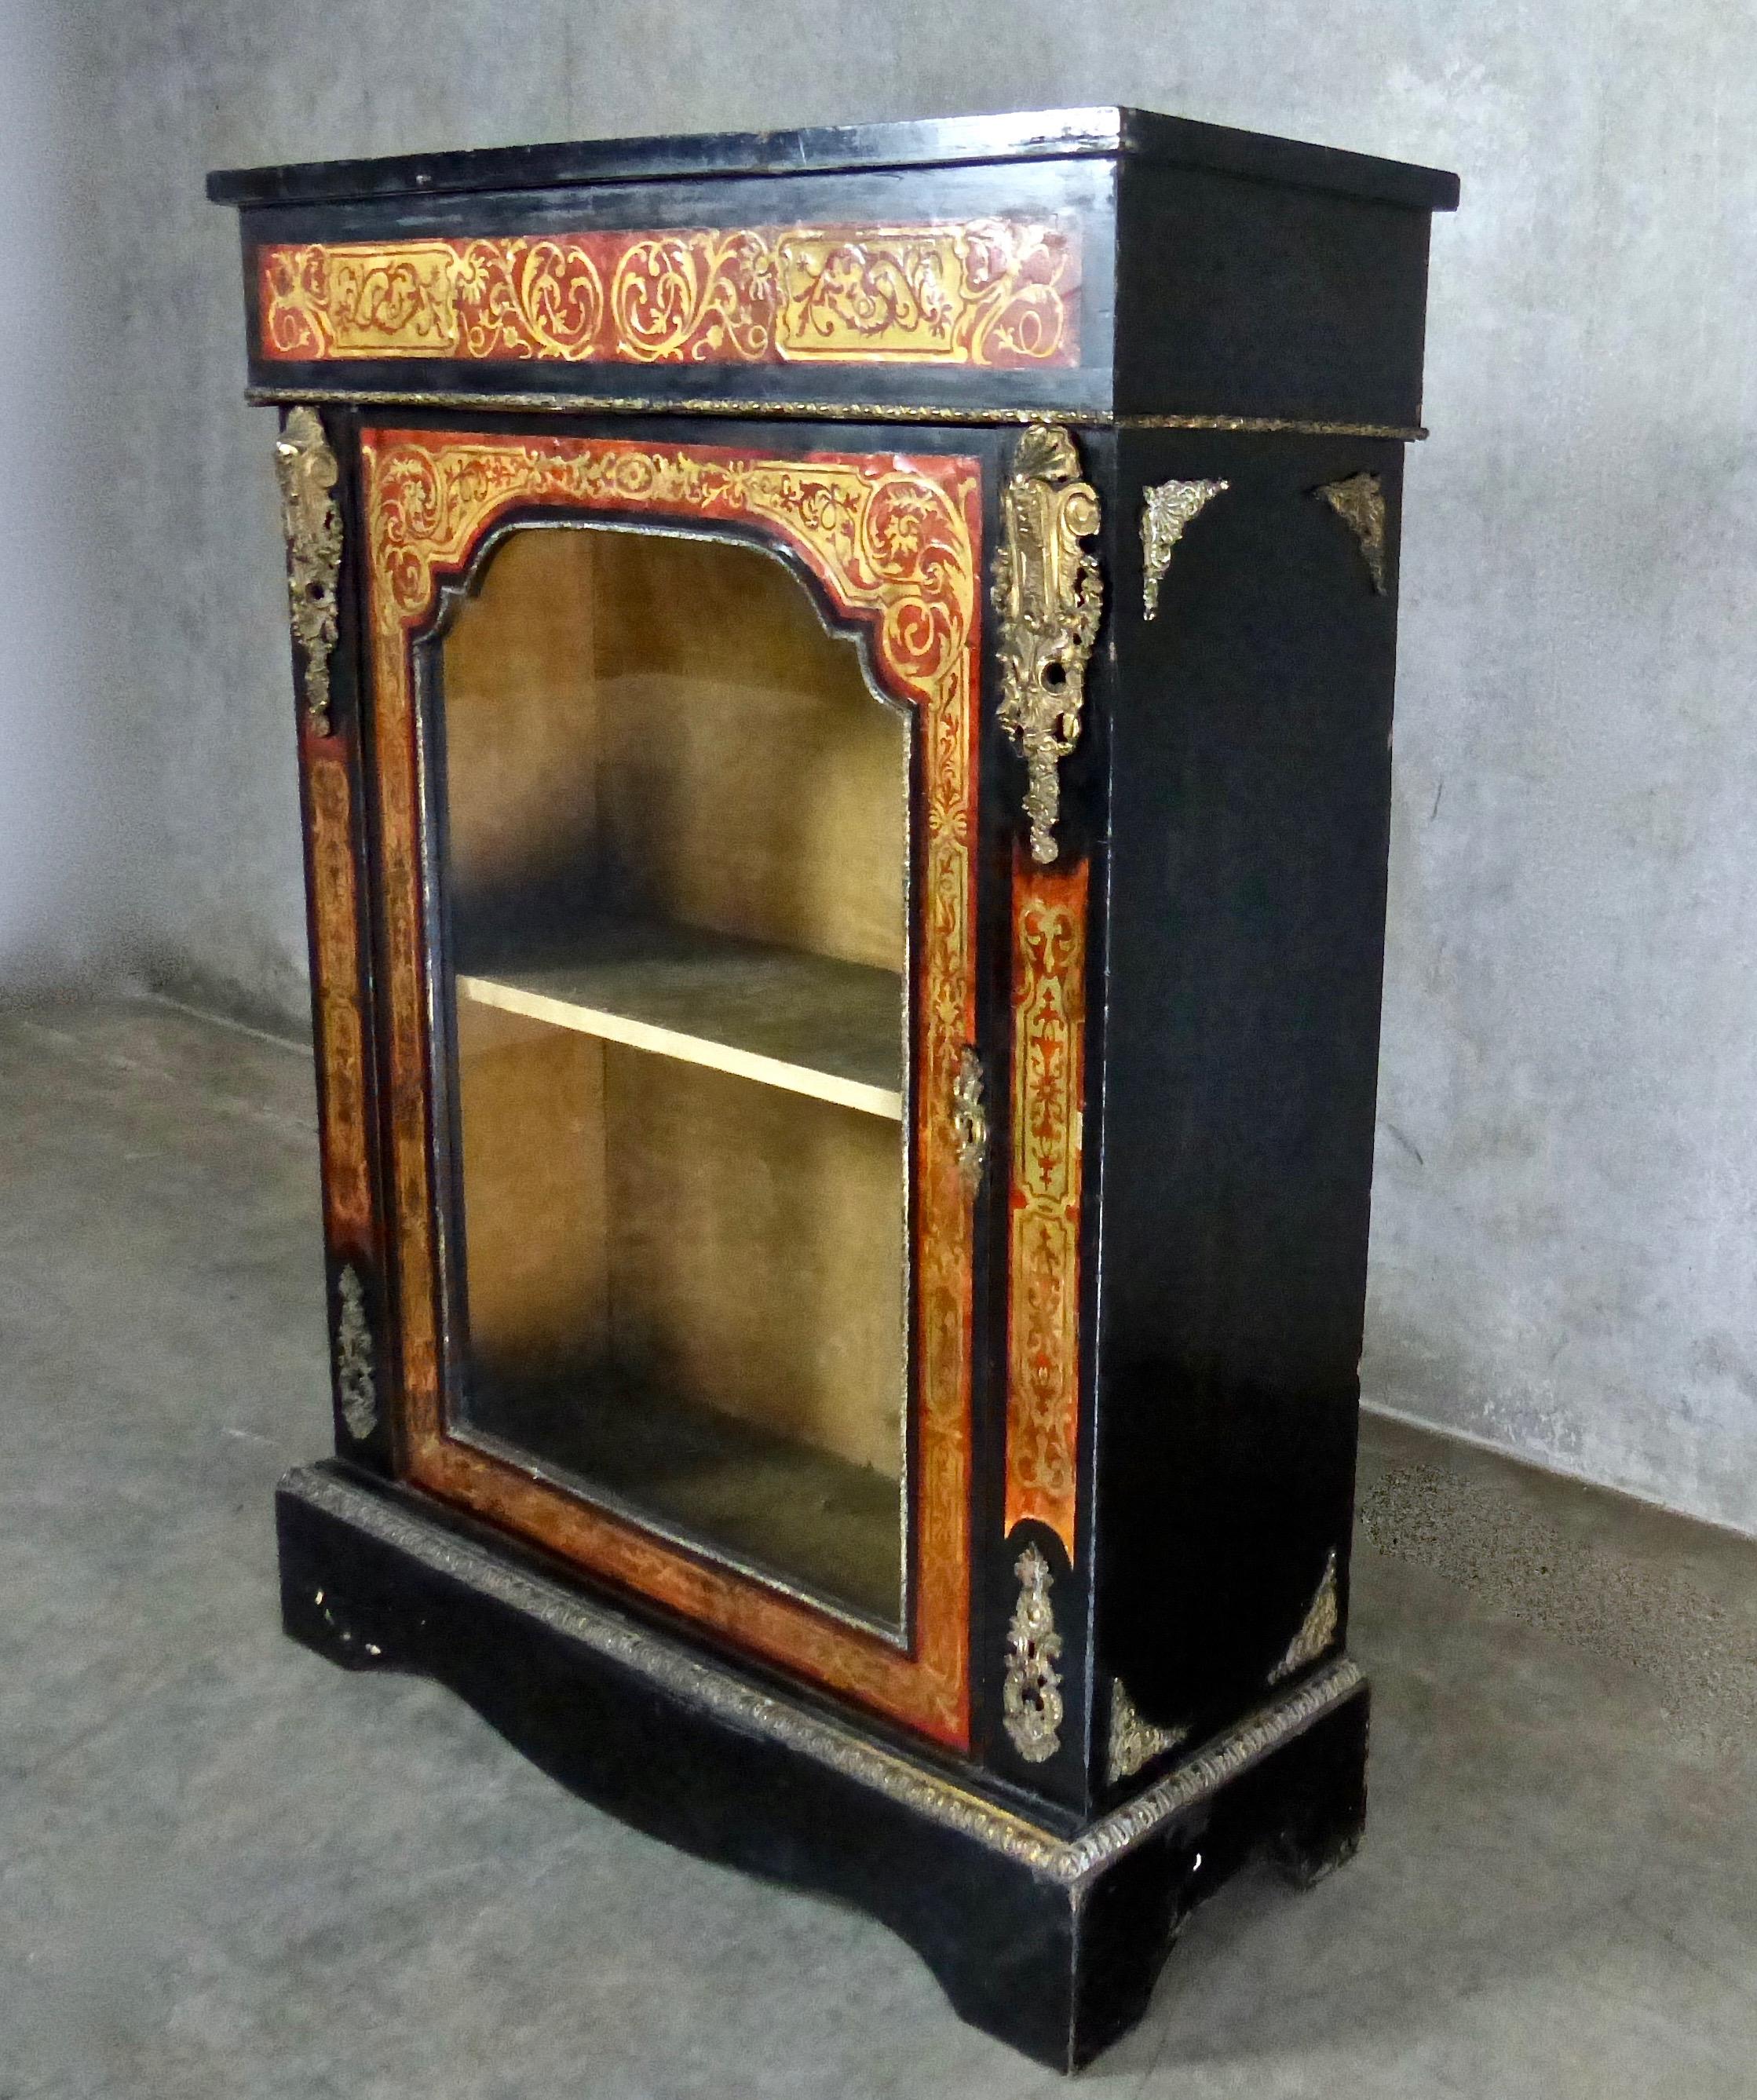 A hand painted, red-and-black lacquered cabinet with ornate, Ormolu accents (gilded, cast metal). Beautifully detailed throughout, with its high gloss finish intact. Display shelves behind glass doors. A wonderful piece in original